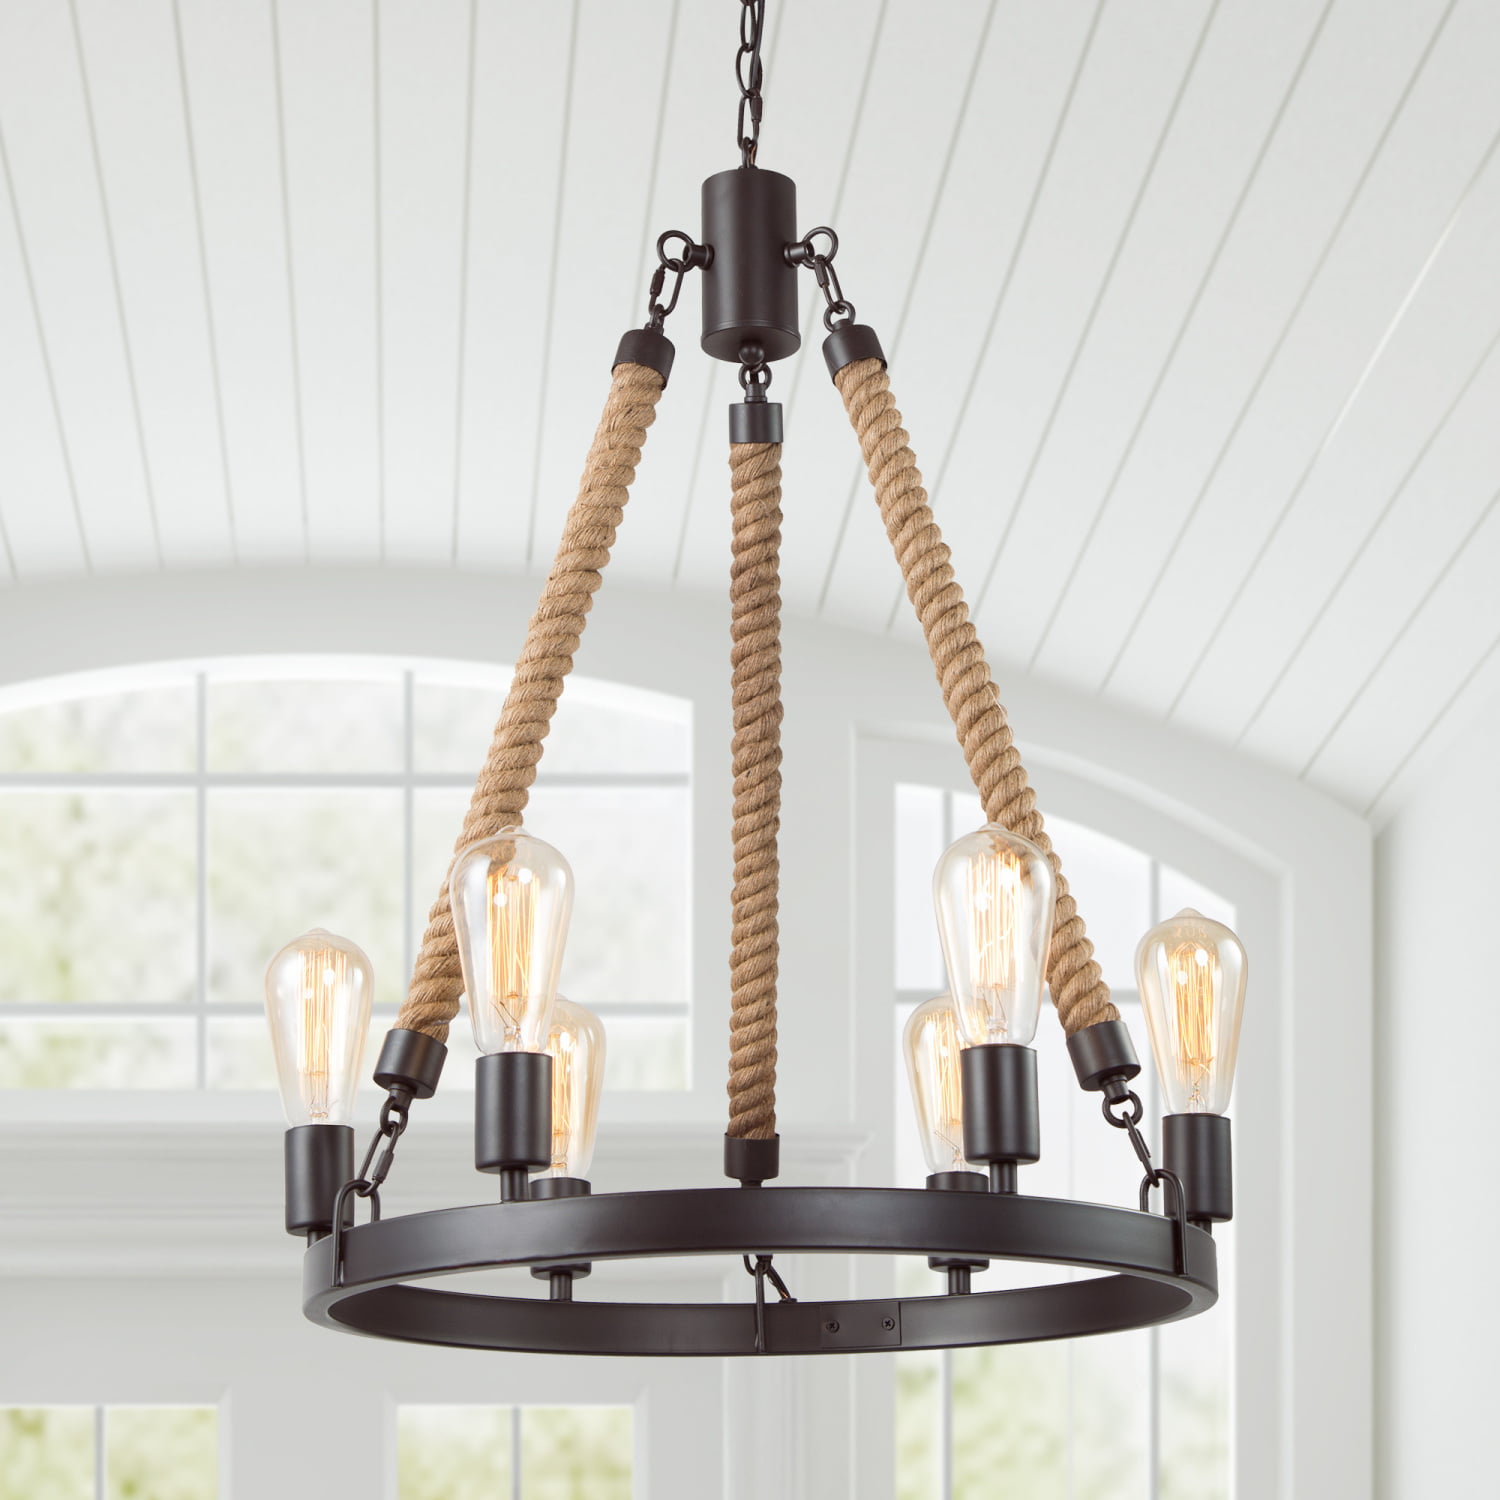 Wood Style Linear Metal Frame Oil Rubbed Bronze Kira Home Brentwood 30 6-Light Rustic Kitchen Island Light Pendant Chandelier Walnut Style Finish Seeded Glass Shades 